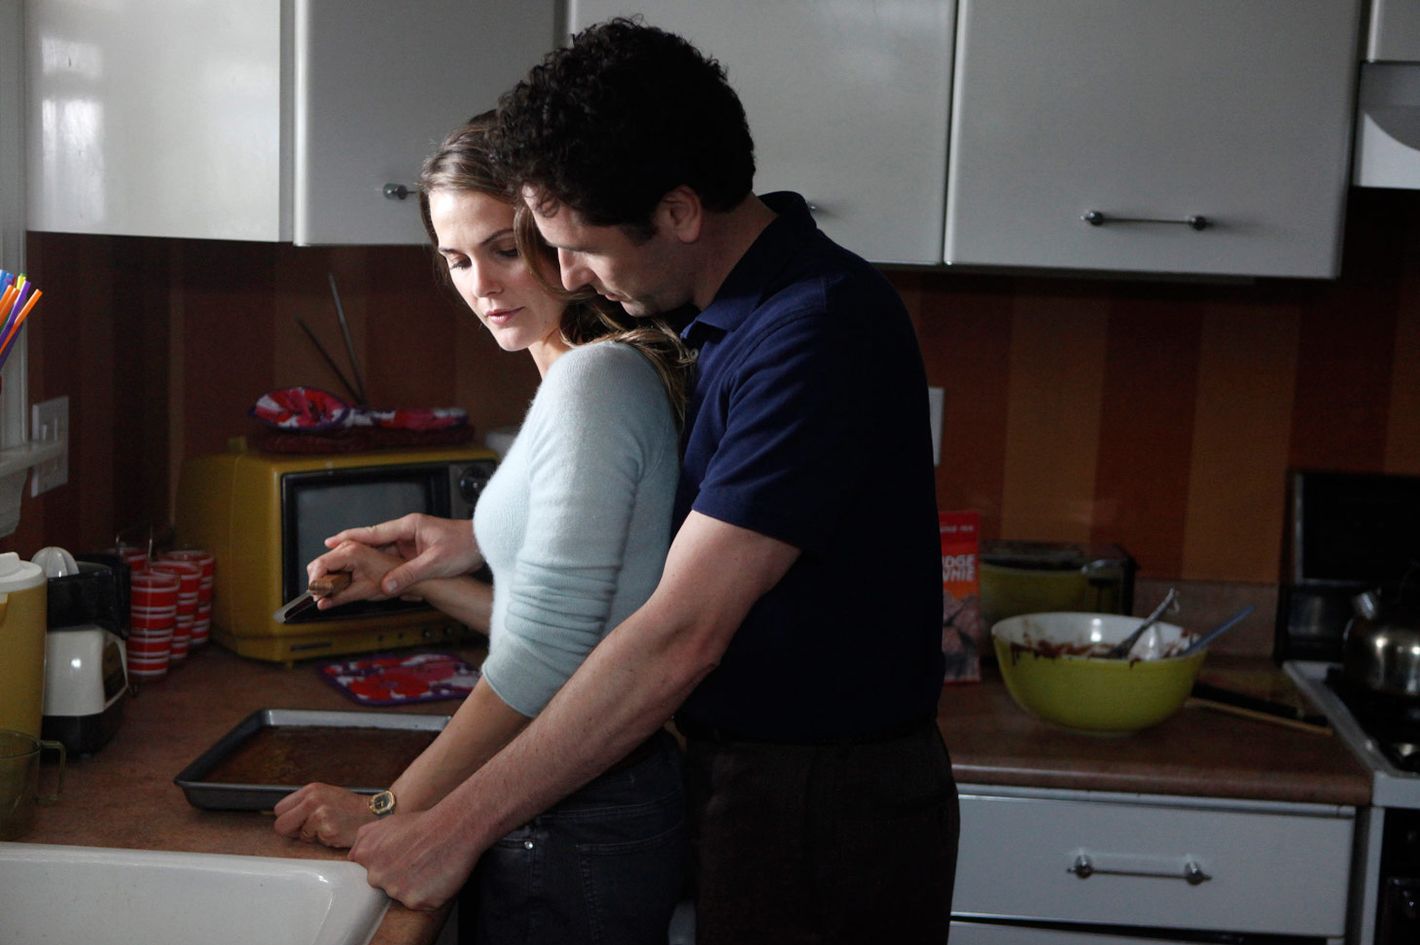 Cooking Rapesex Hd Video - The Americans Recap: Way to Commit